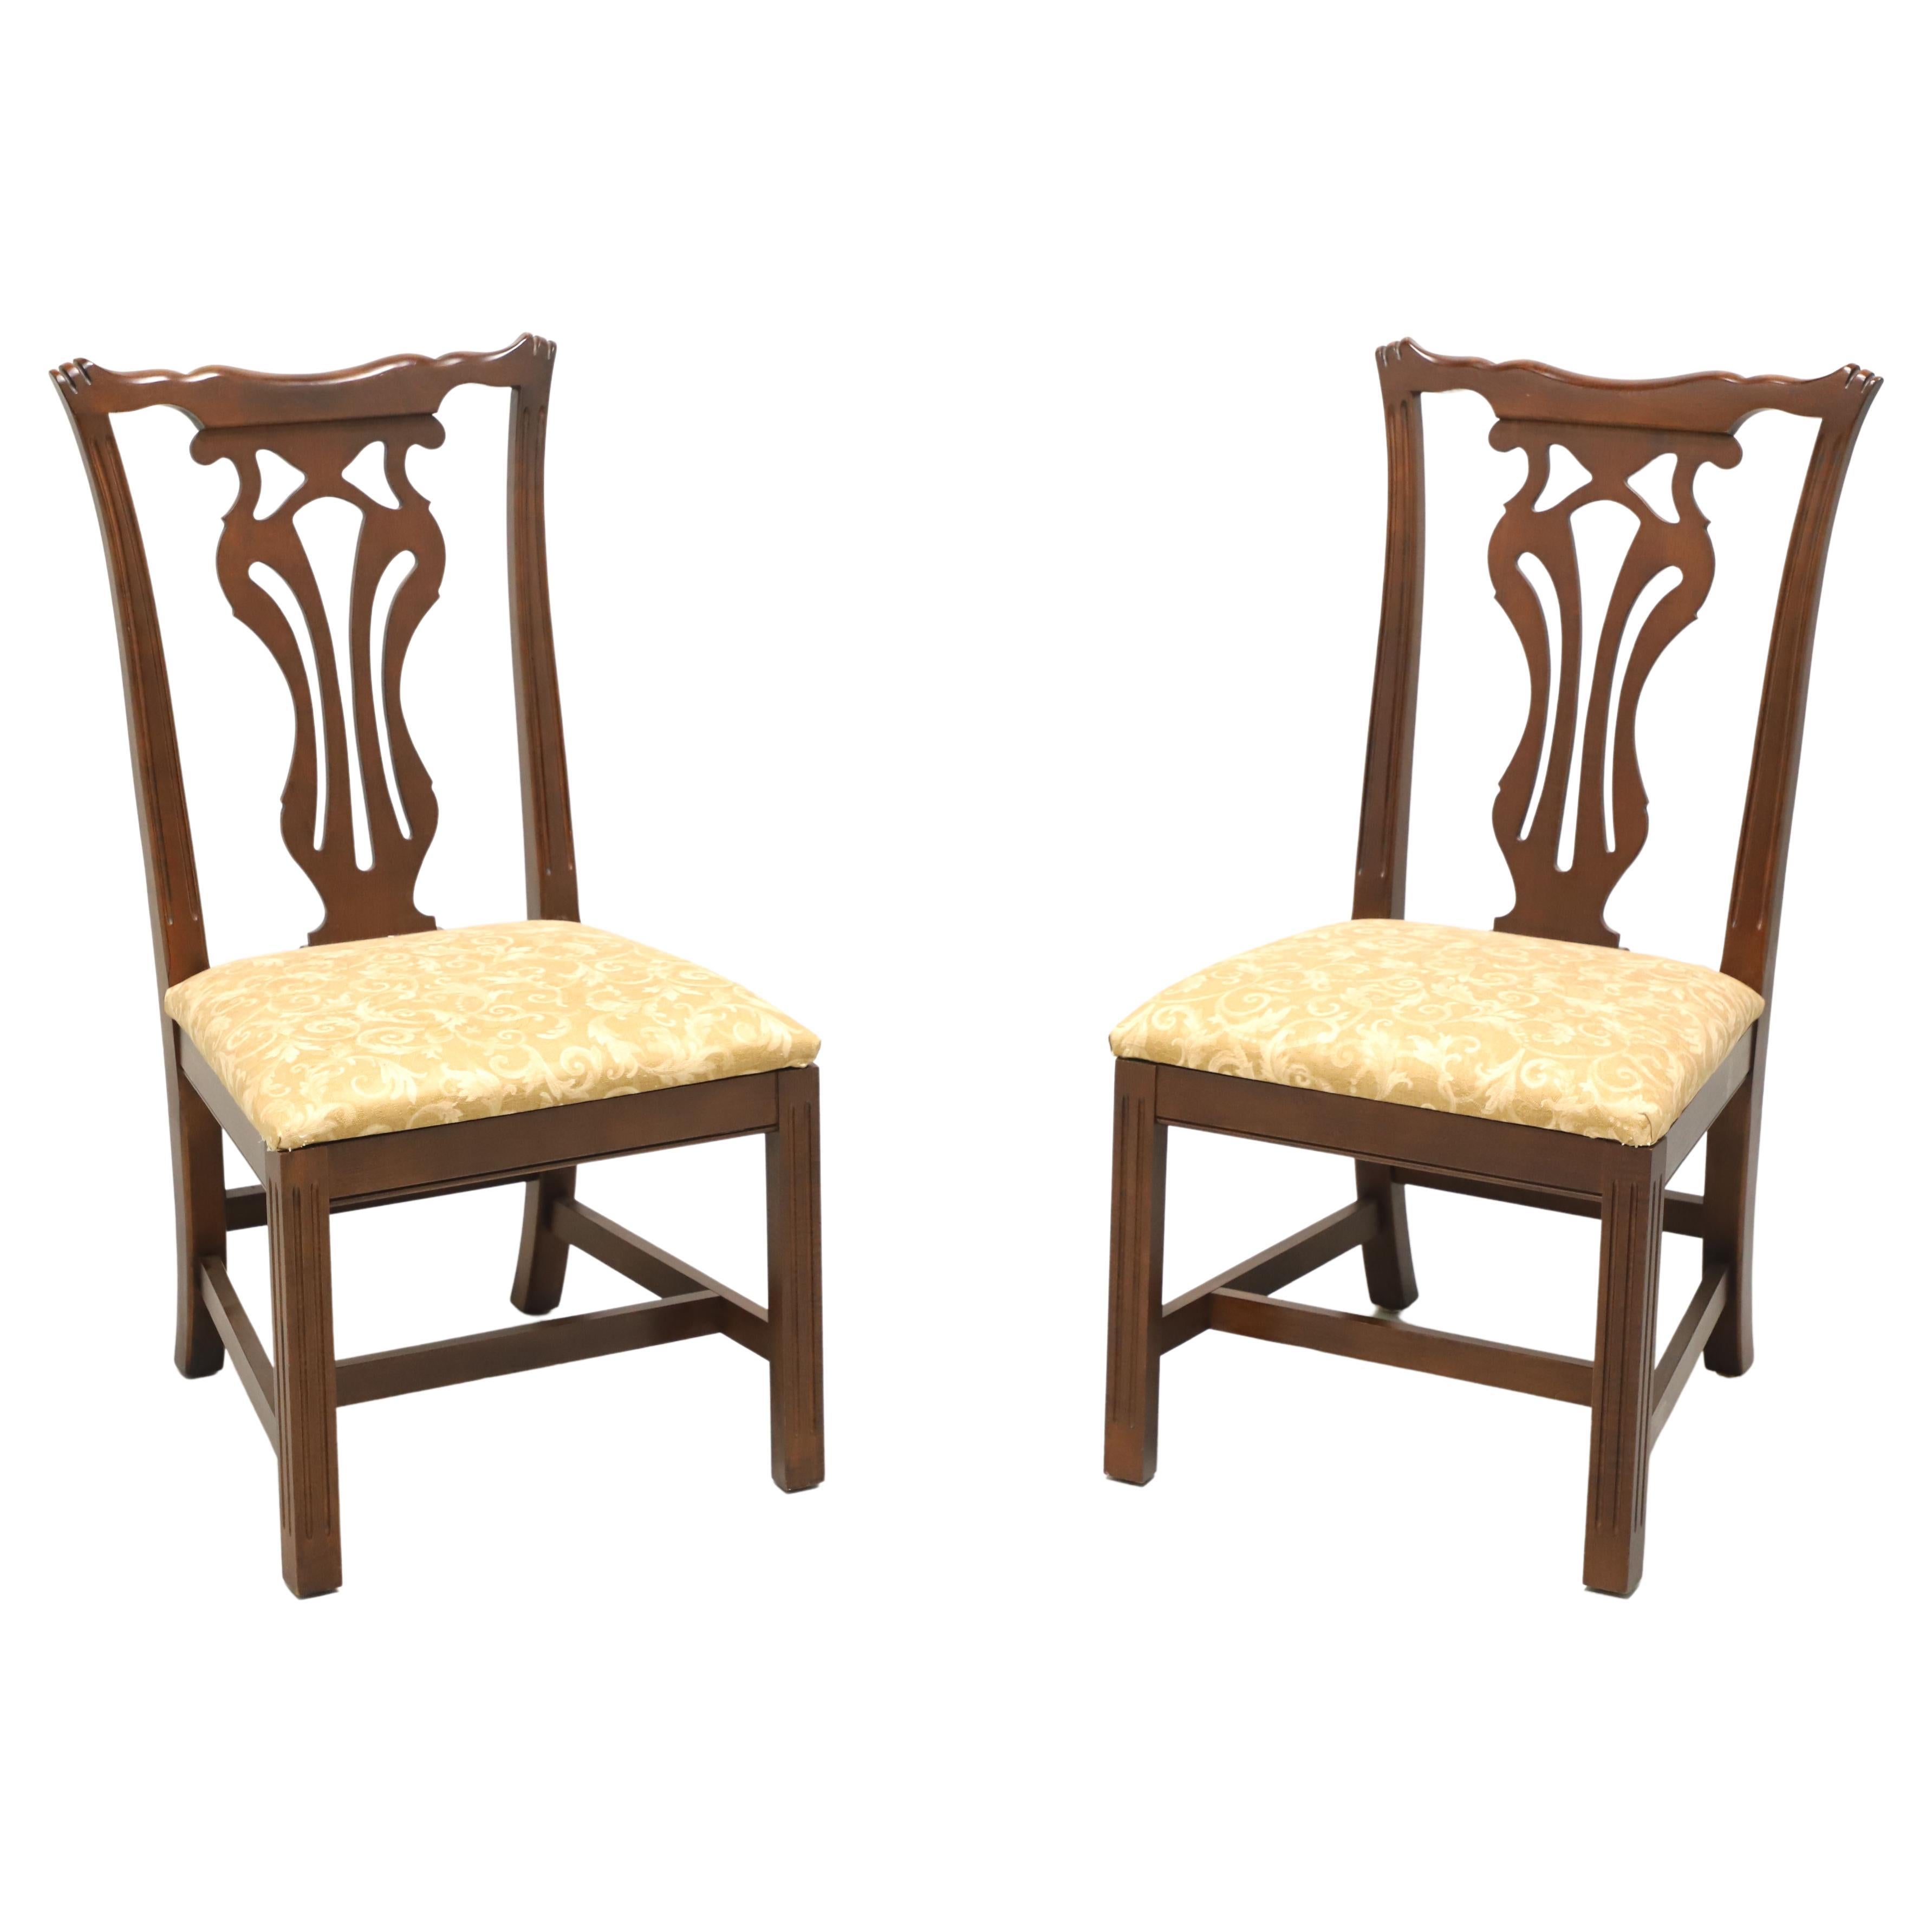 KNOB CREEK Mahogany Chippendale Dining Side Chairs - Pair A For Sale